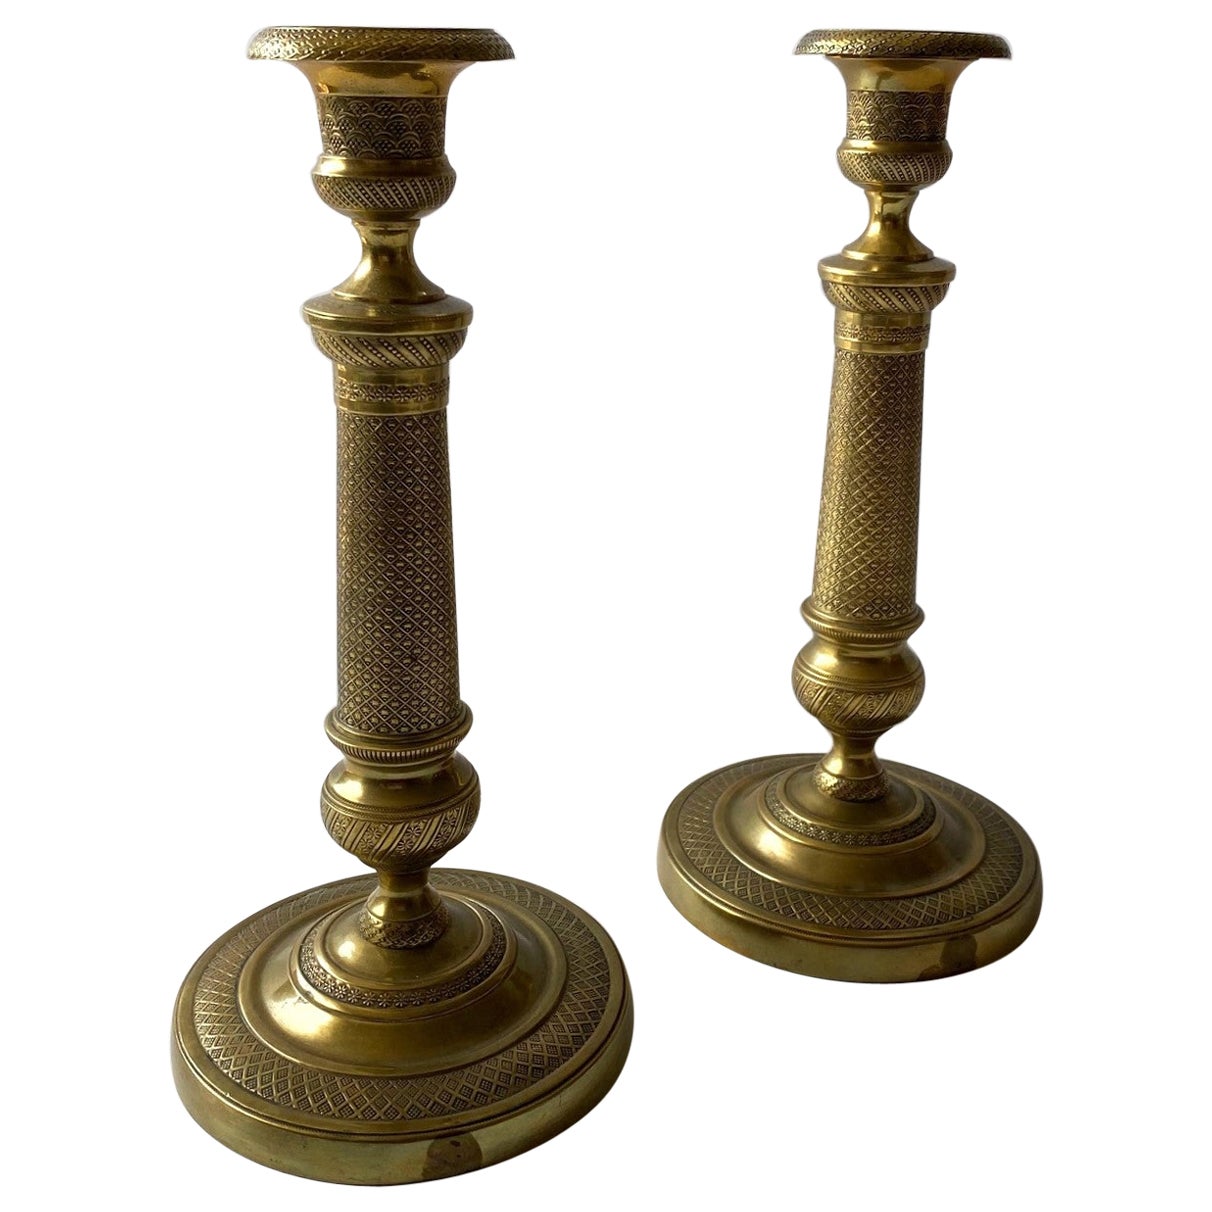 Heavily Engraved Brass English Candlesticks Set of 2 For Sale